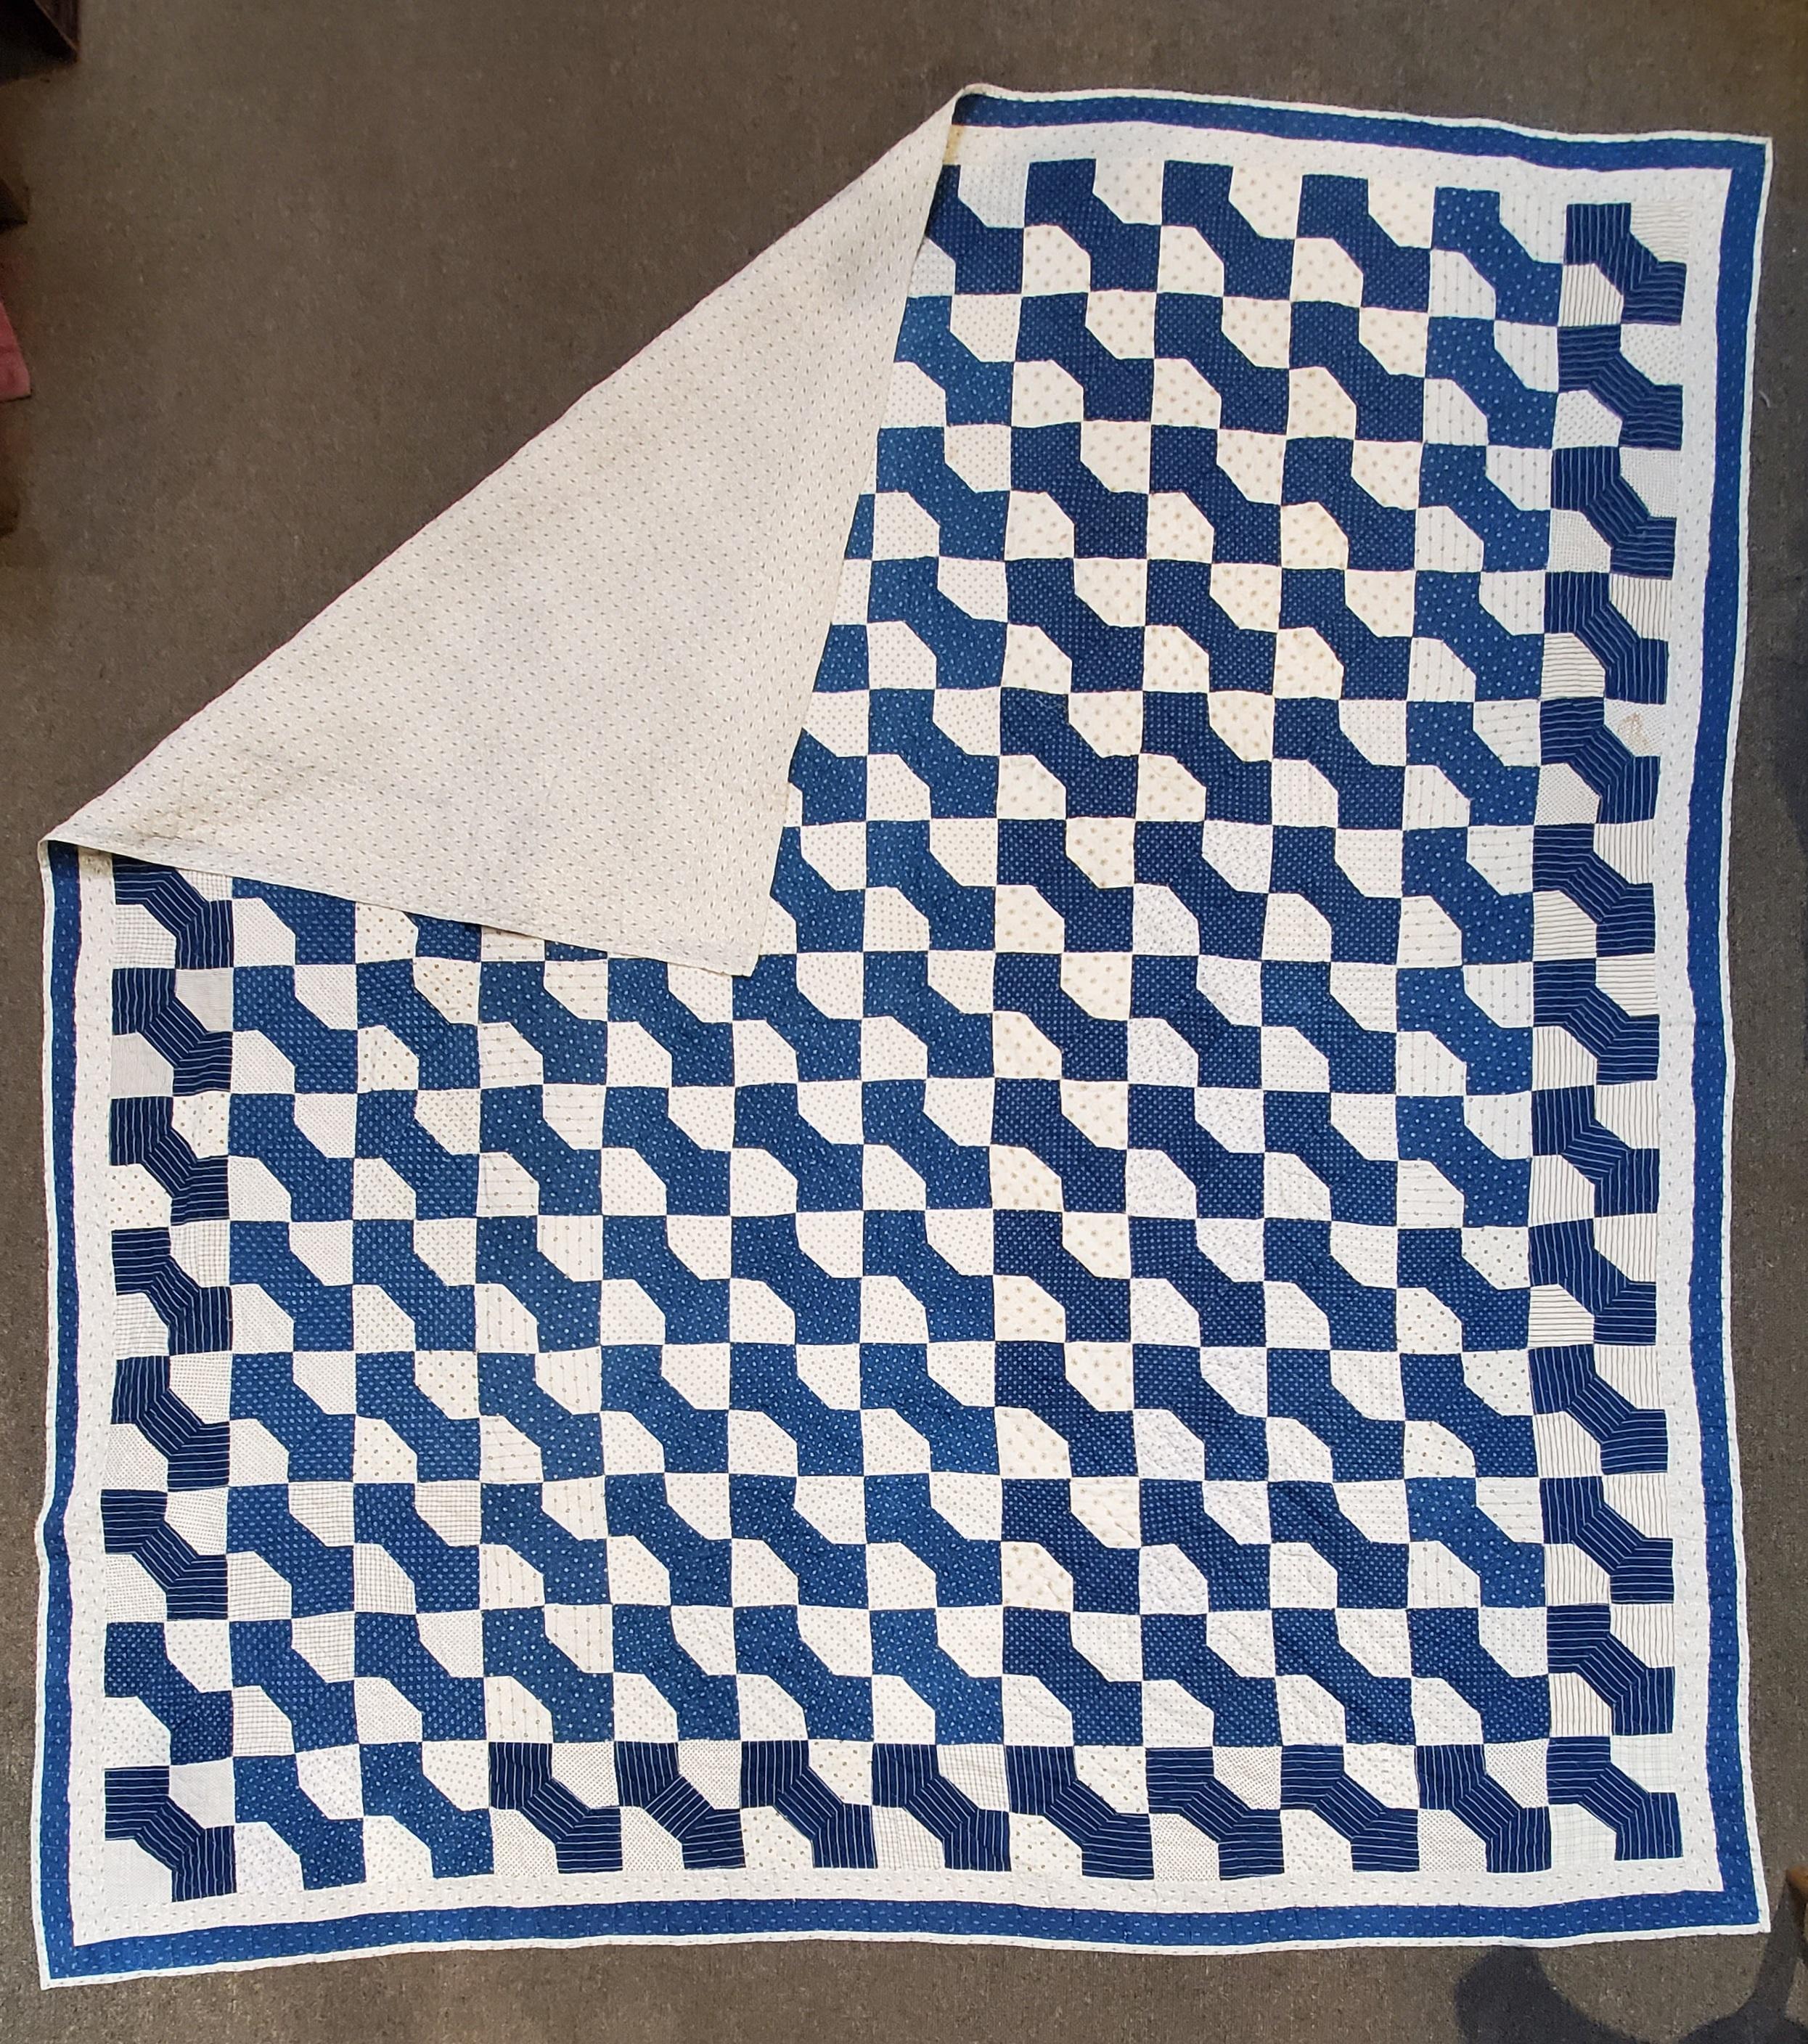 The 19thc blue & white bow tie quilt in fine condition. Geometric pattern and nice quilting.